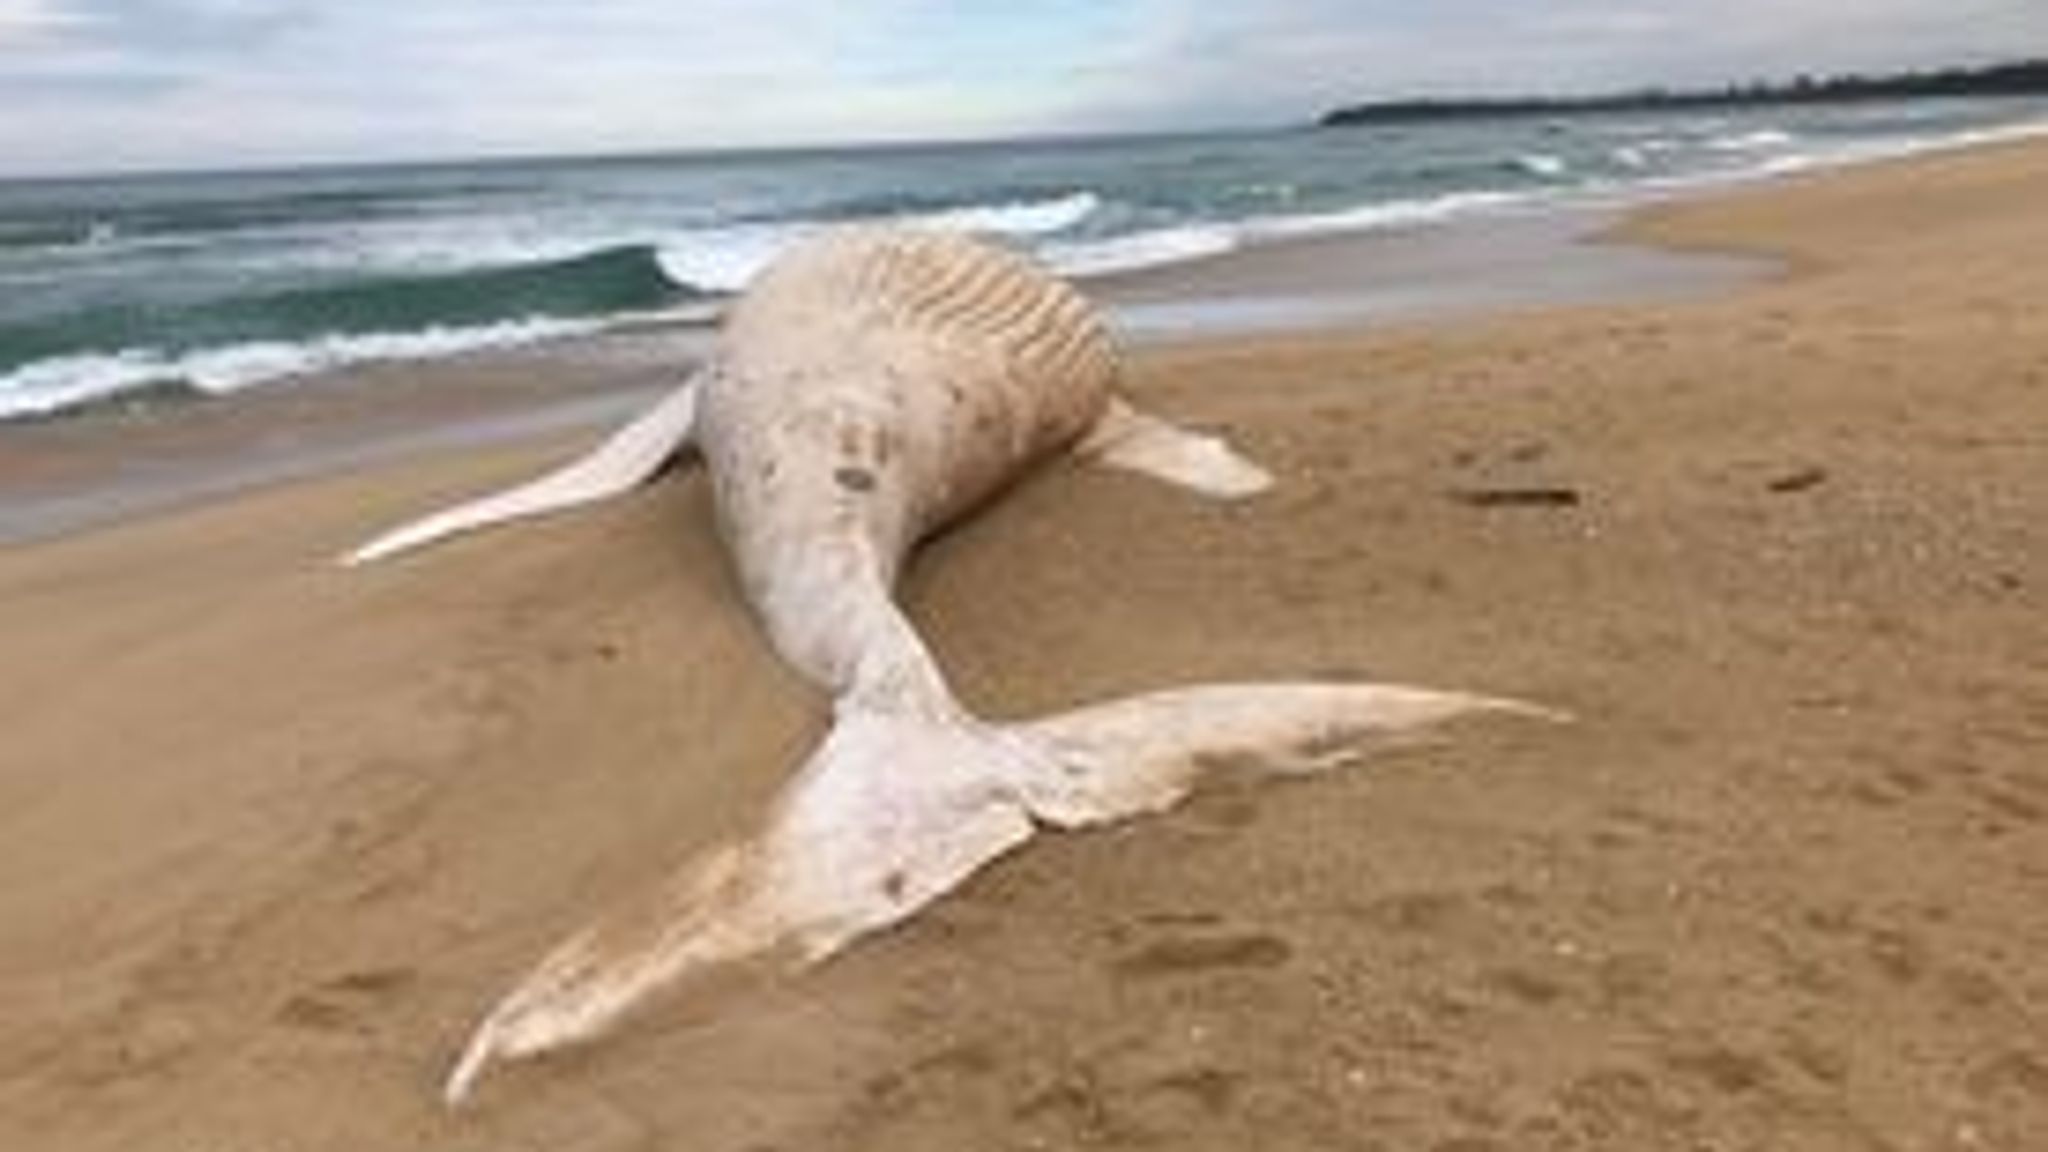 Rare albino whale found washed up on Australia beach is not world-famous humpback Migaloo | World News | Sky News